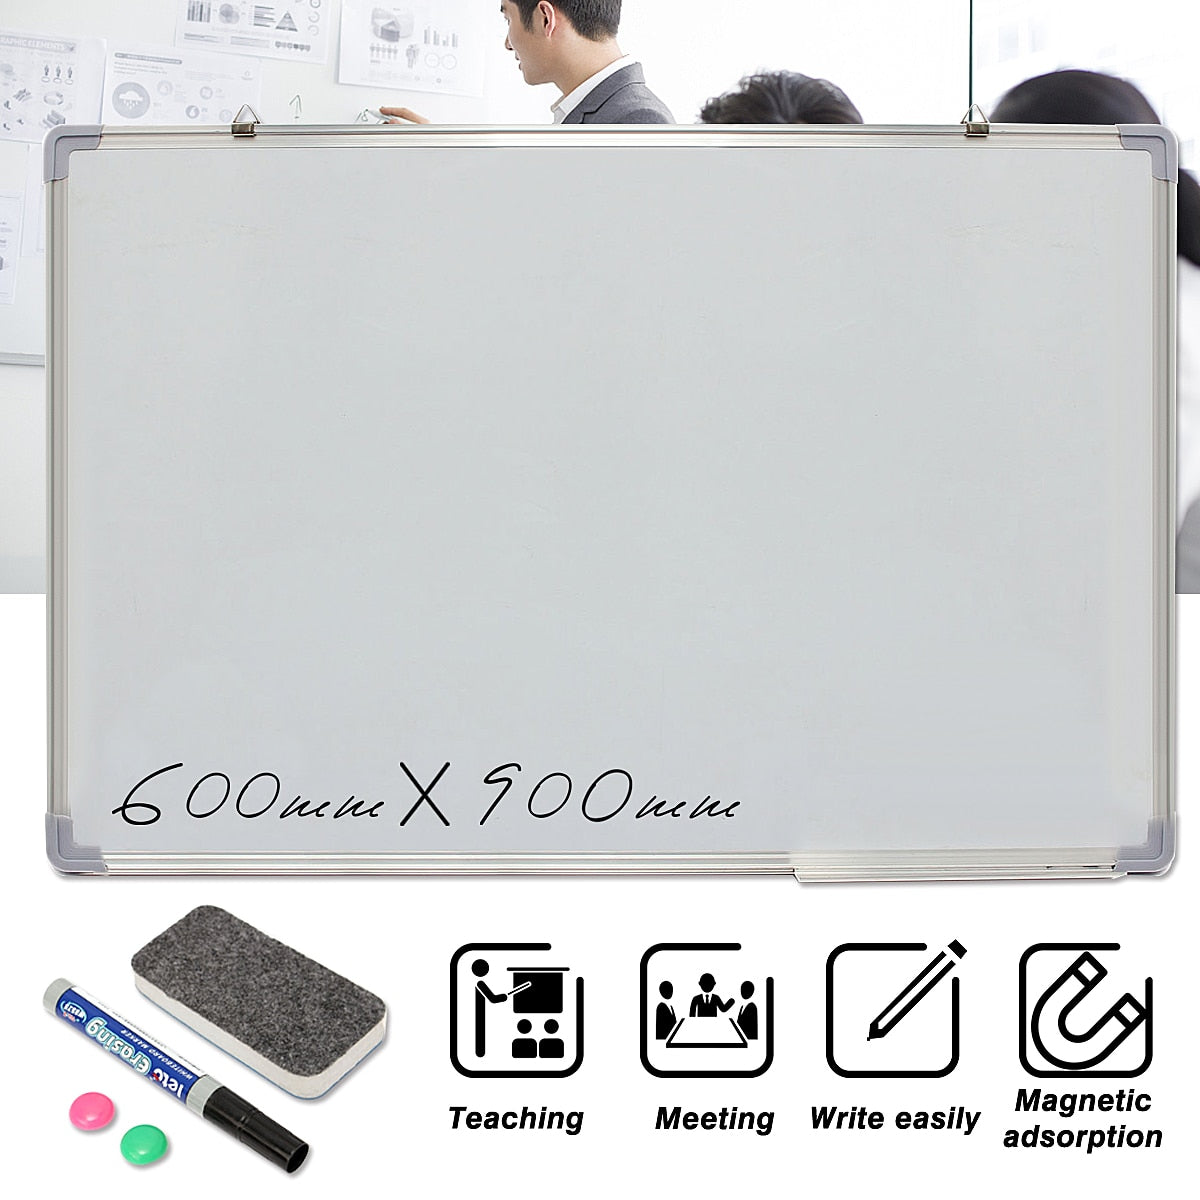 Kicute 600x900MM Magnetic Dry Erase Whiteboard Writing Board Double Side With Pen Erase Magnets Buttons For Office School